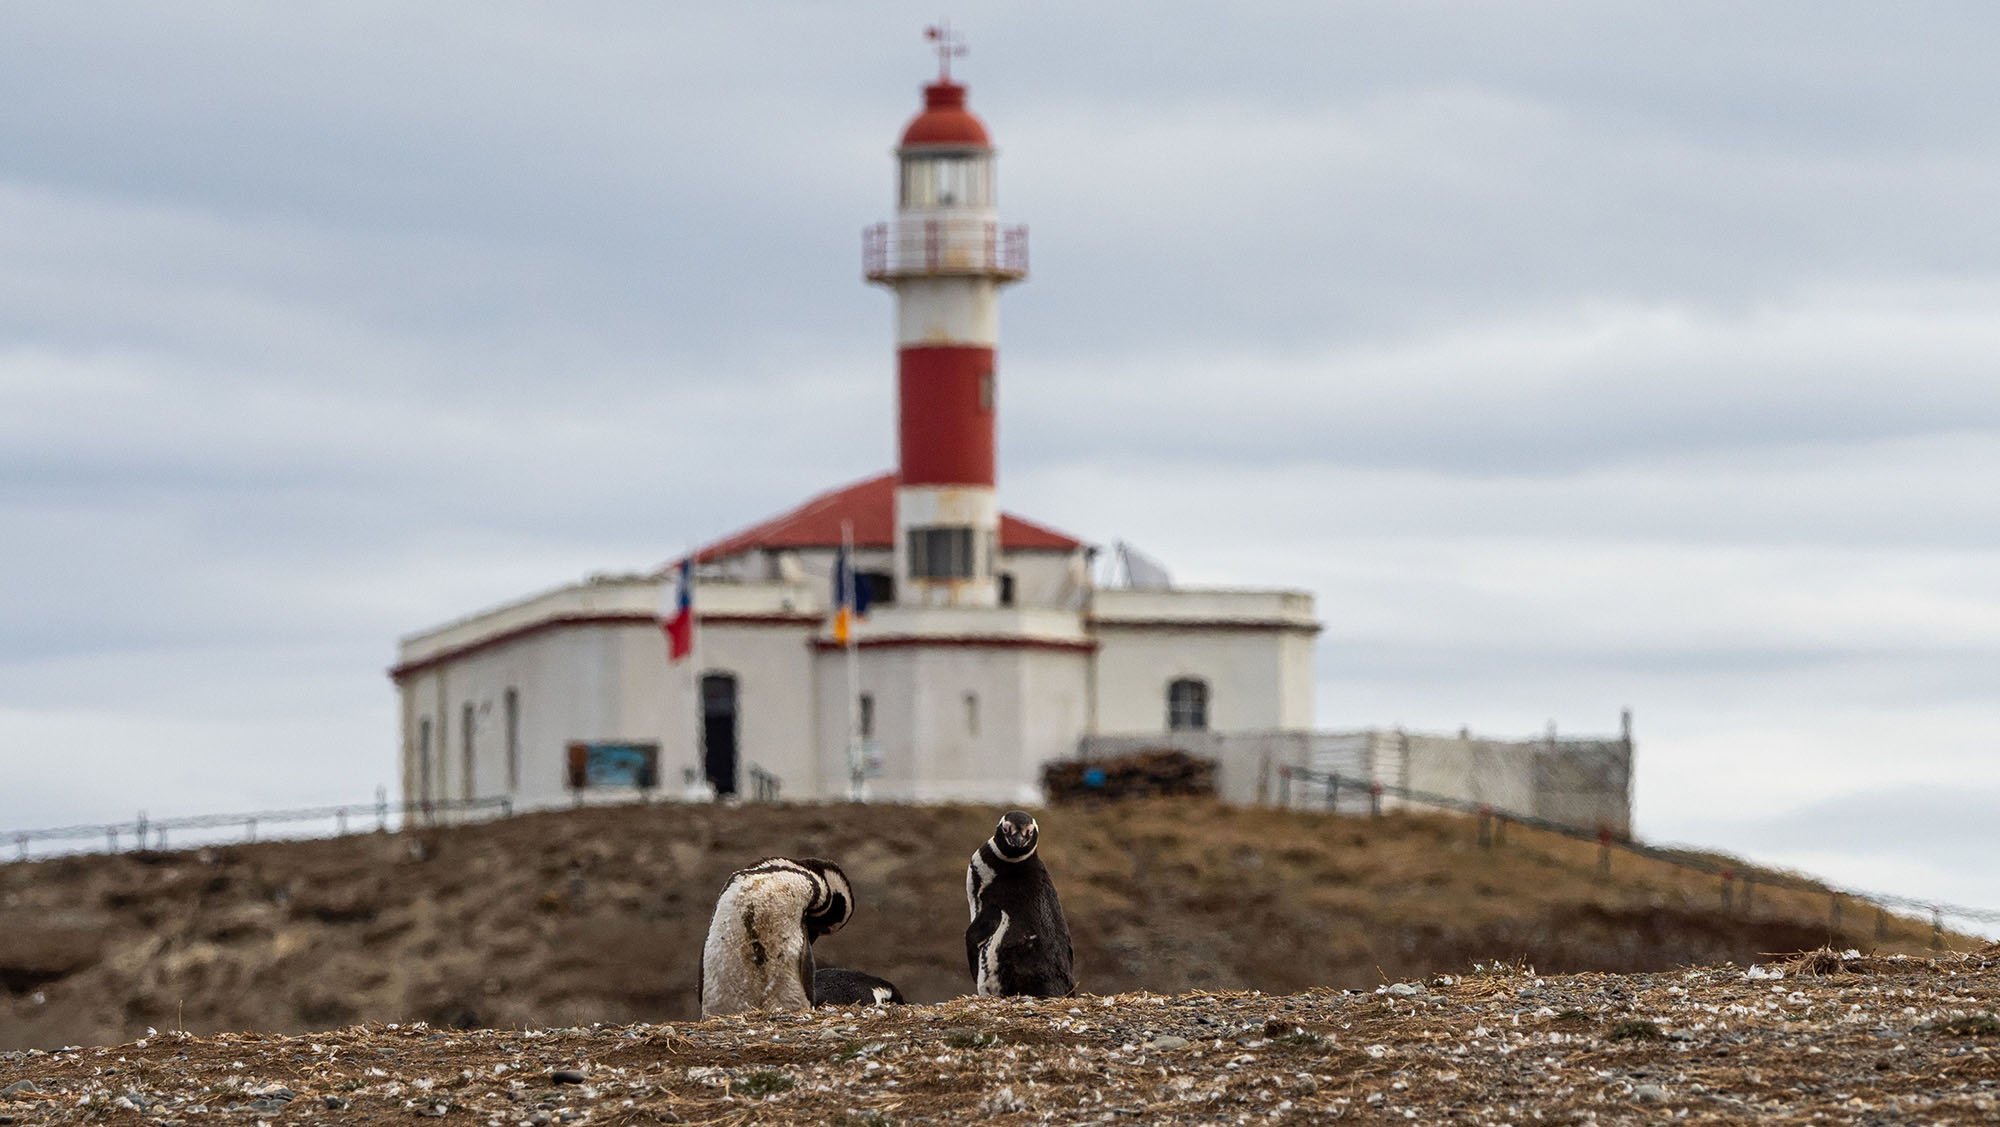 penguins in front of lighthouse